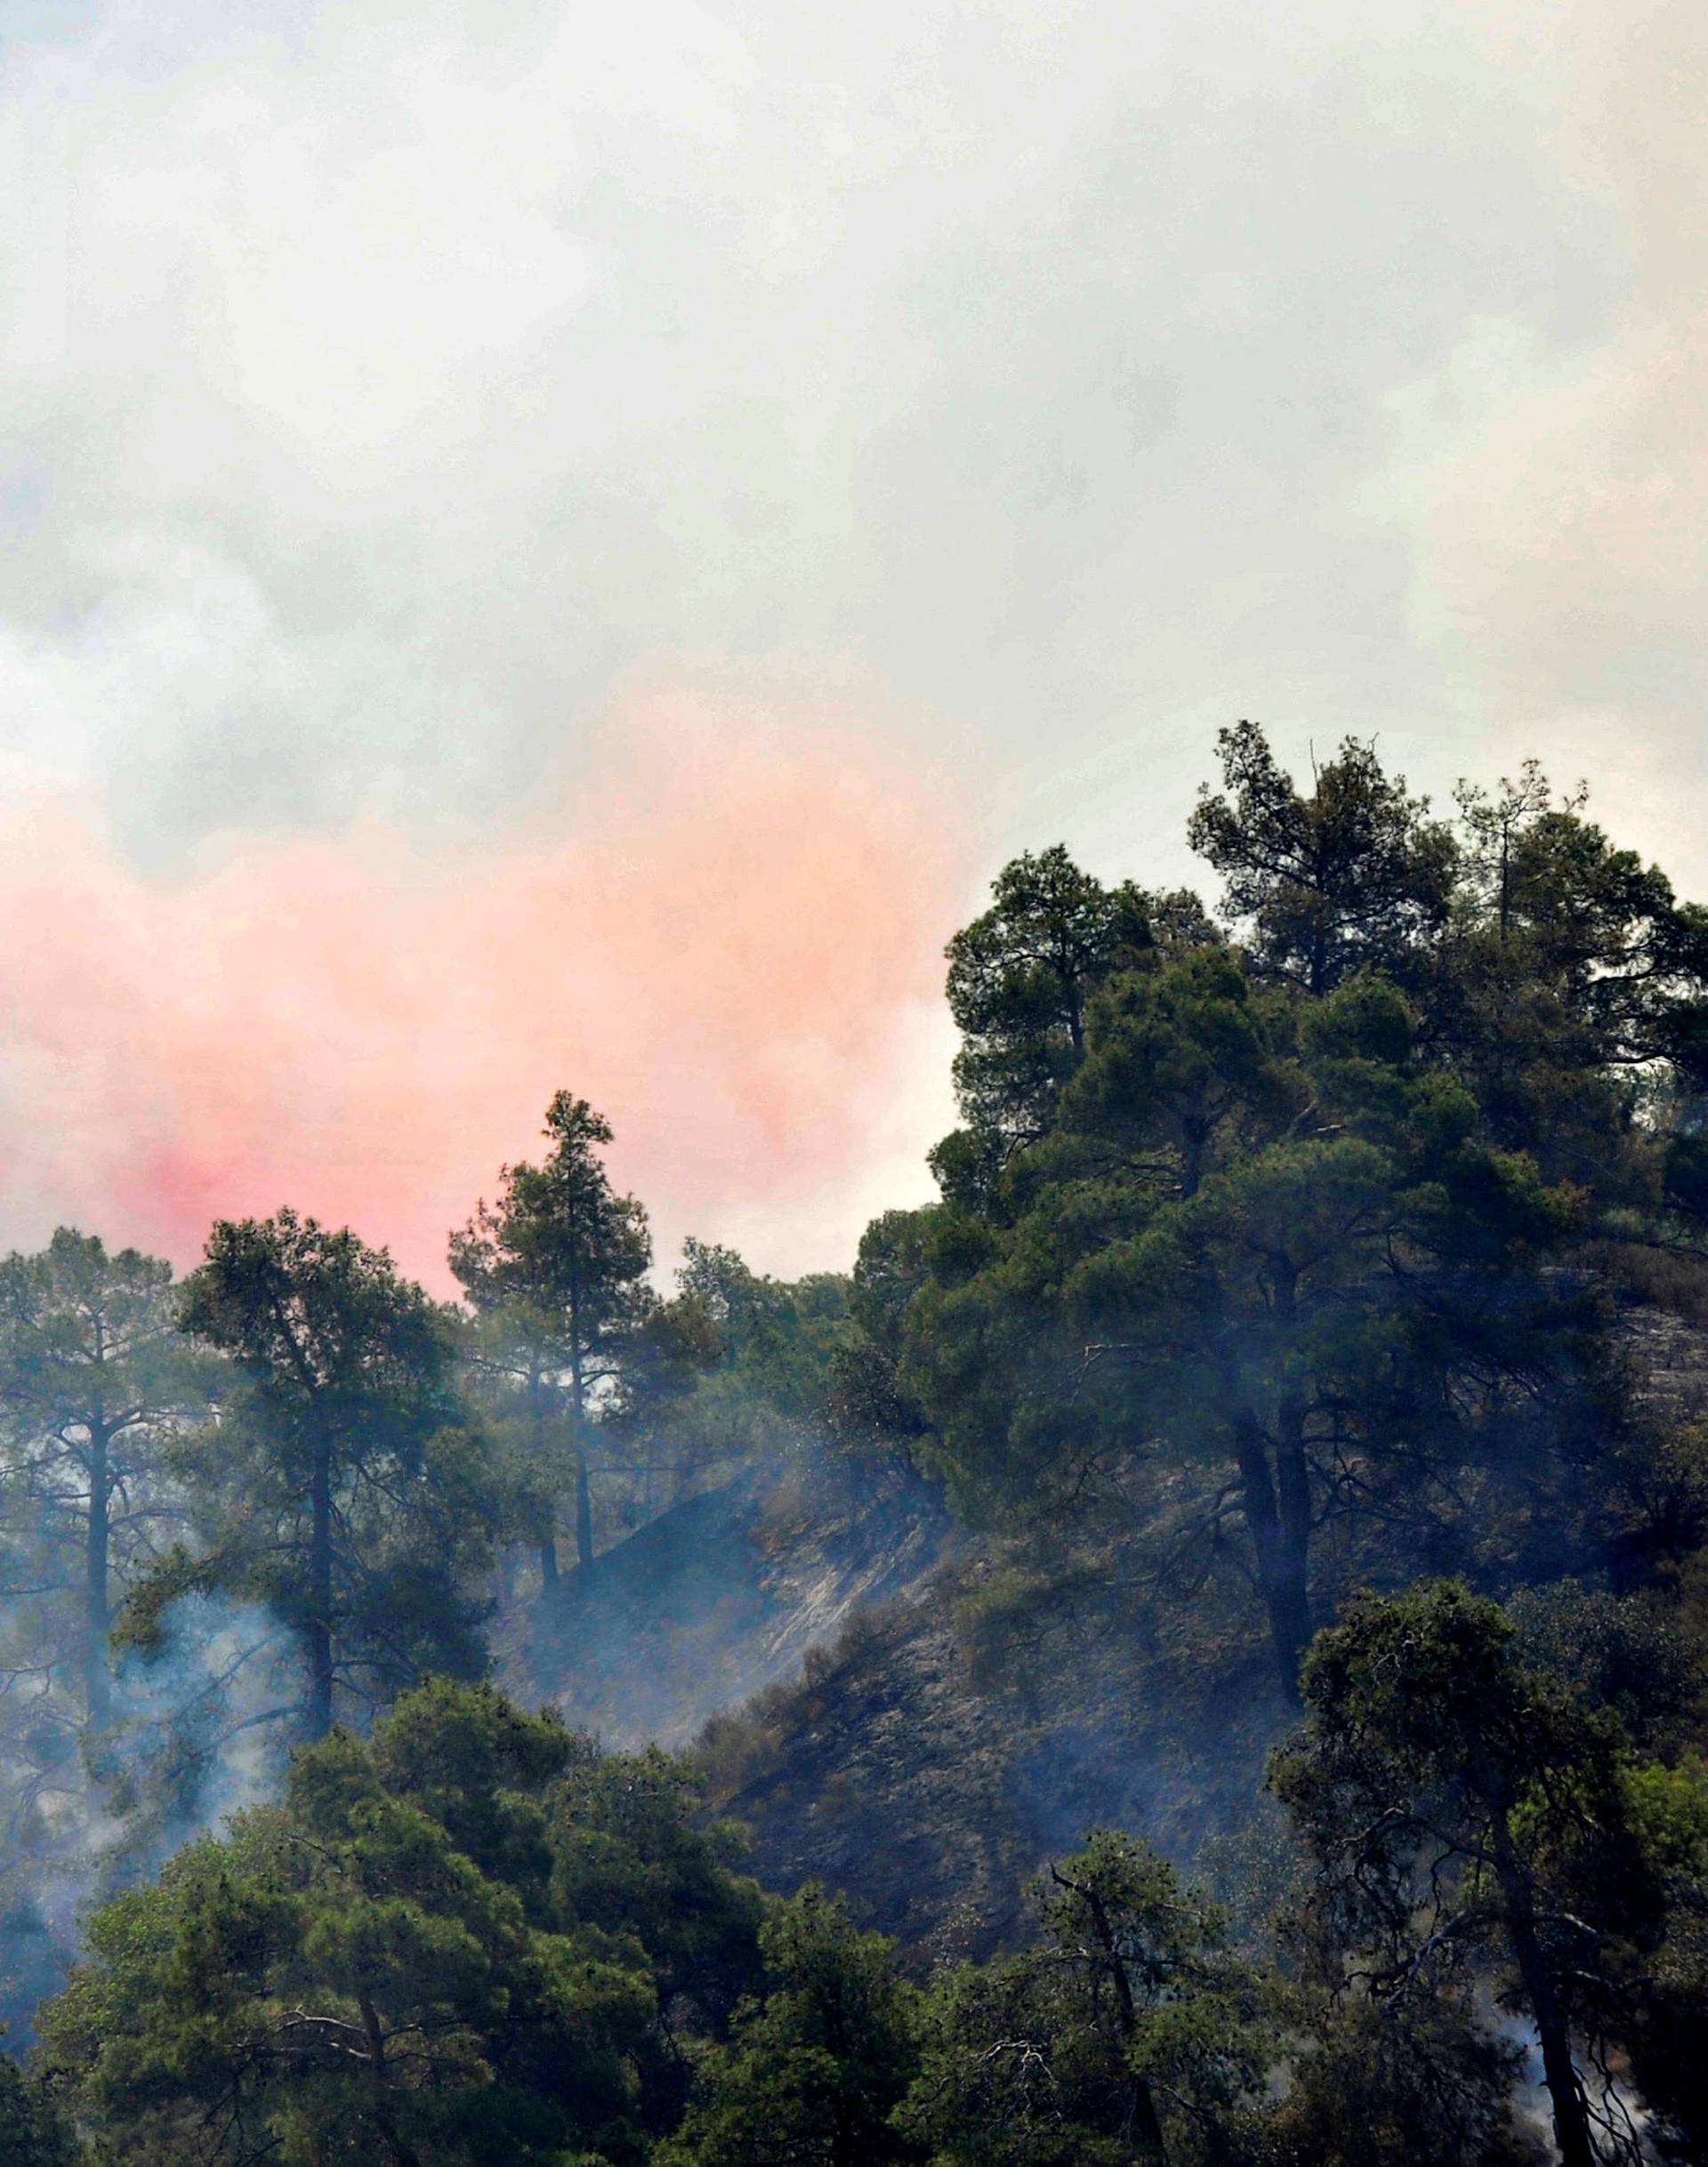 A firefighting plane drops water onto a forest fire at the foothills of Troodos mountain region in Cyprus